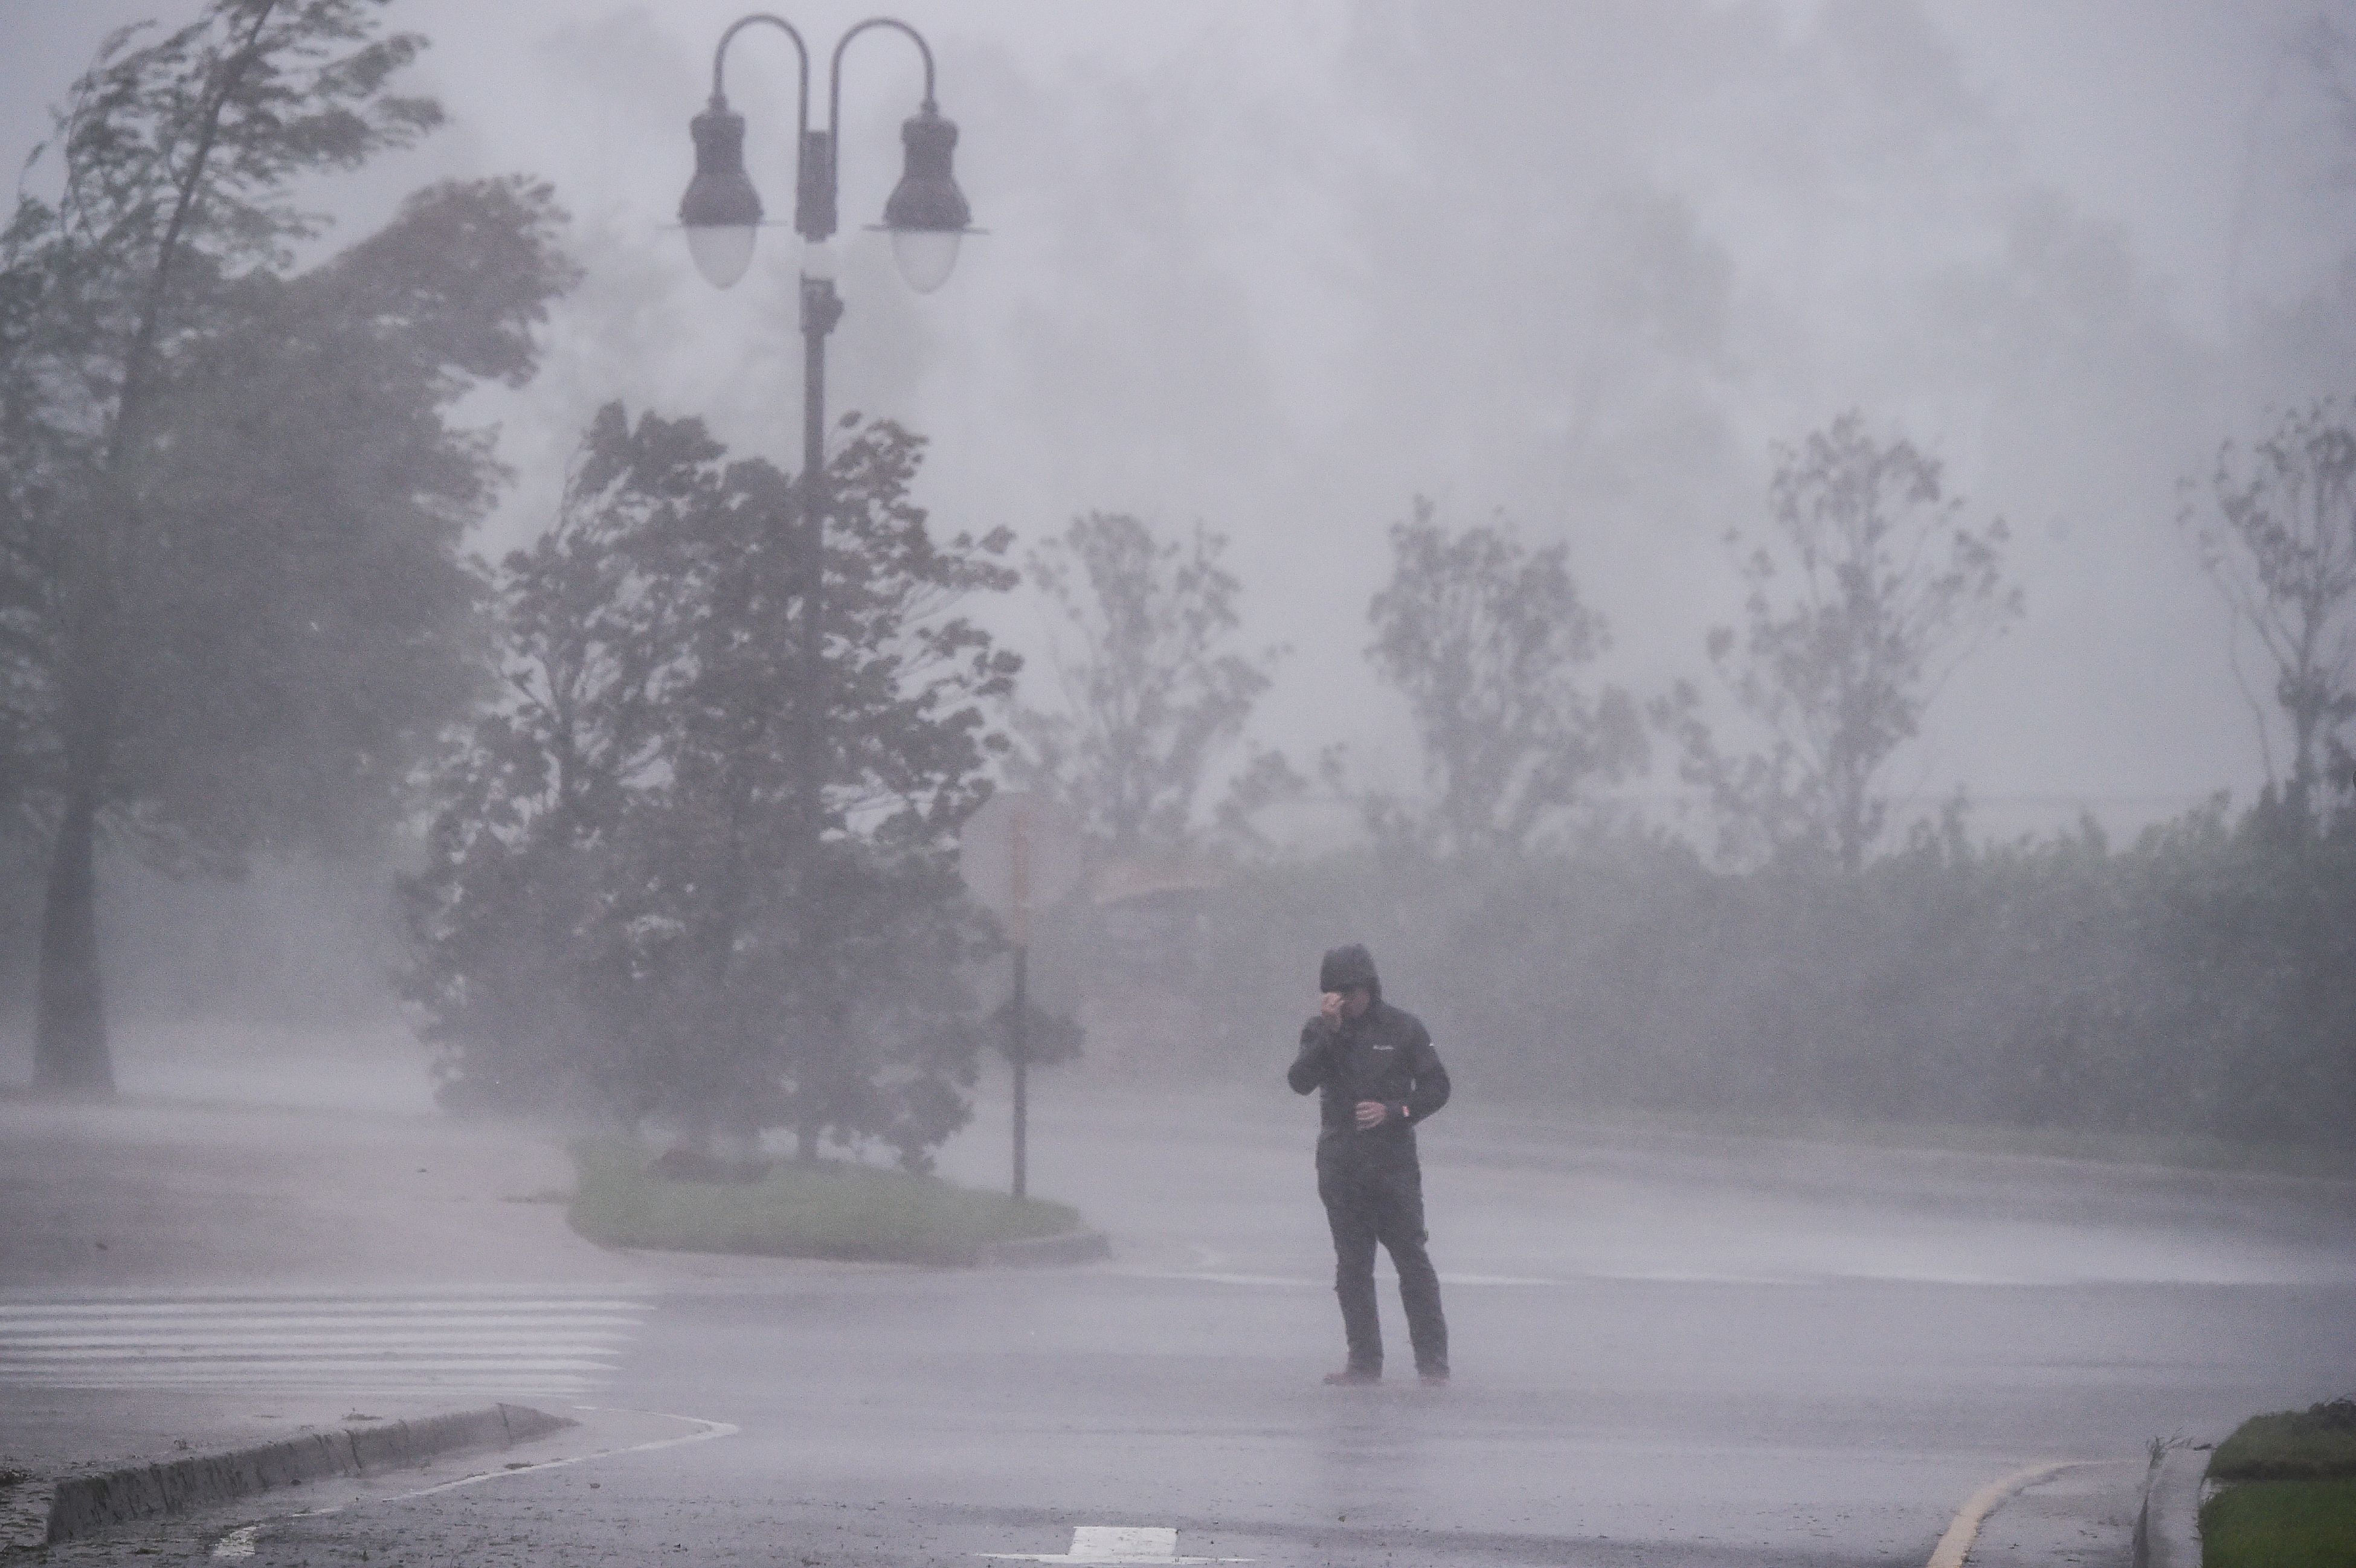  A reporter covers his face as he reports while Hurricane Delta makes landfall in Lake Charles, Louisiana on October 9